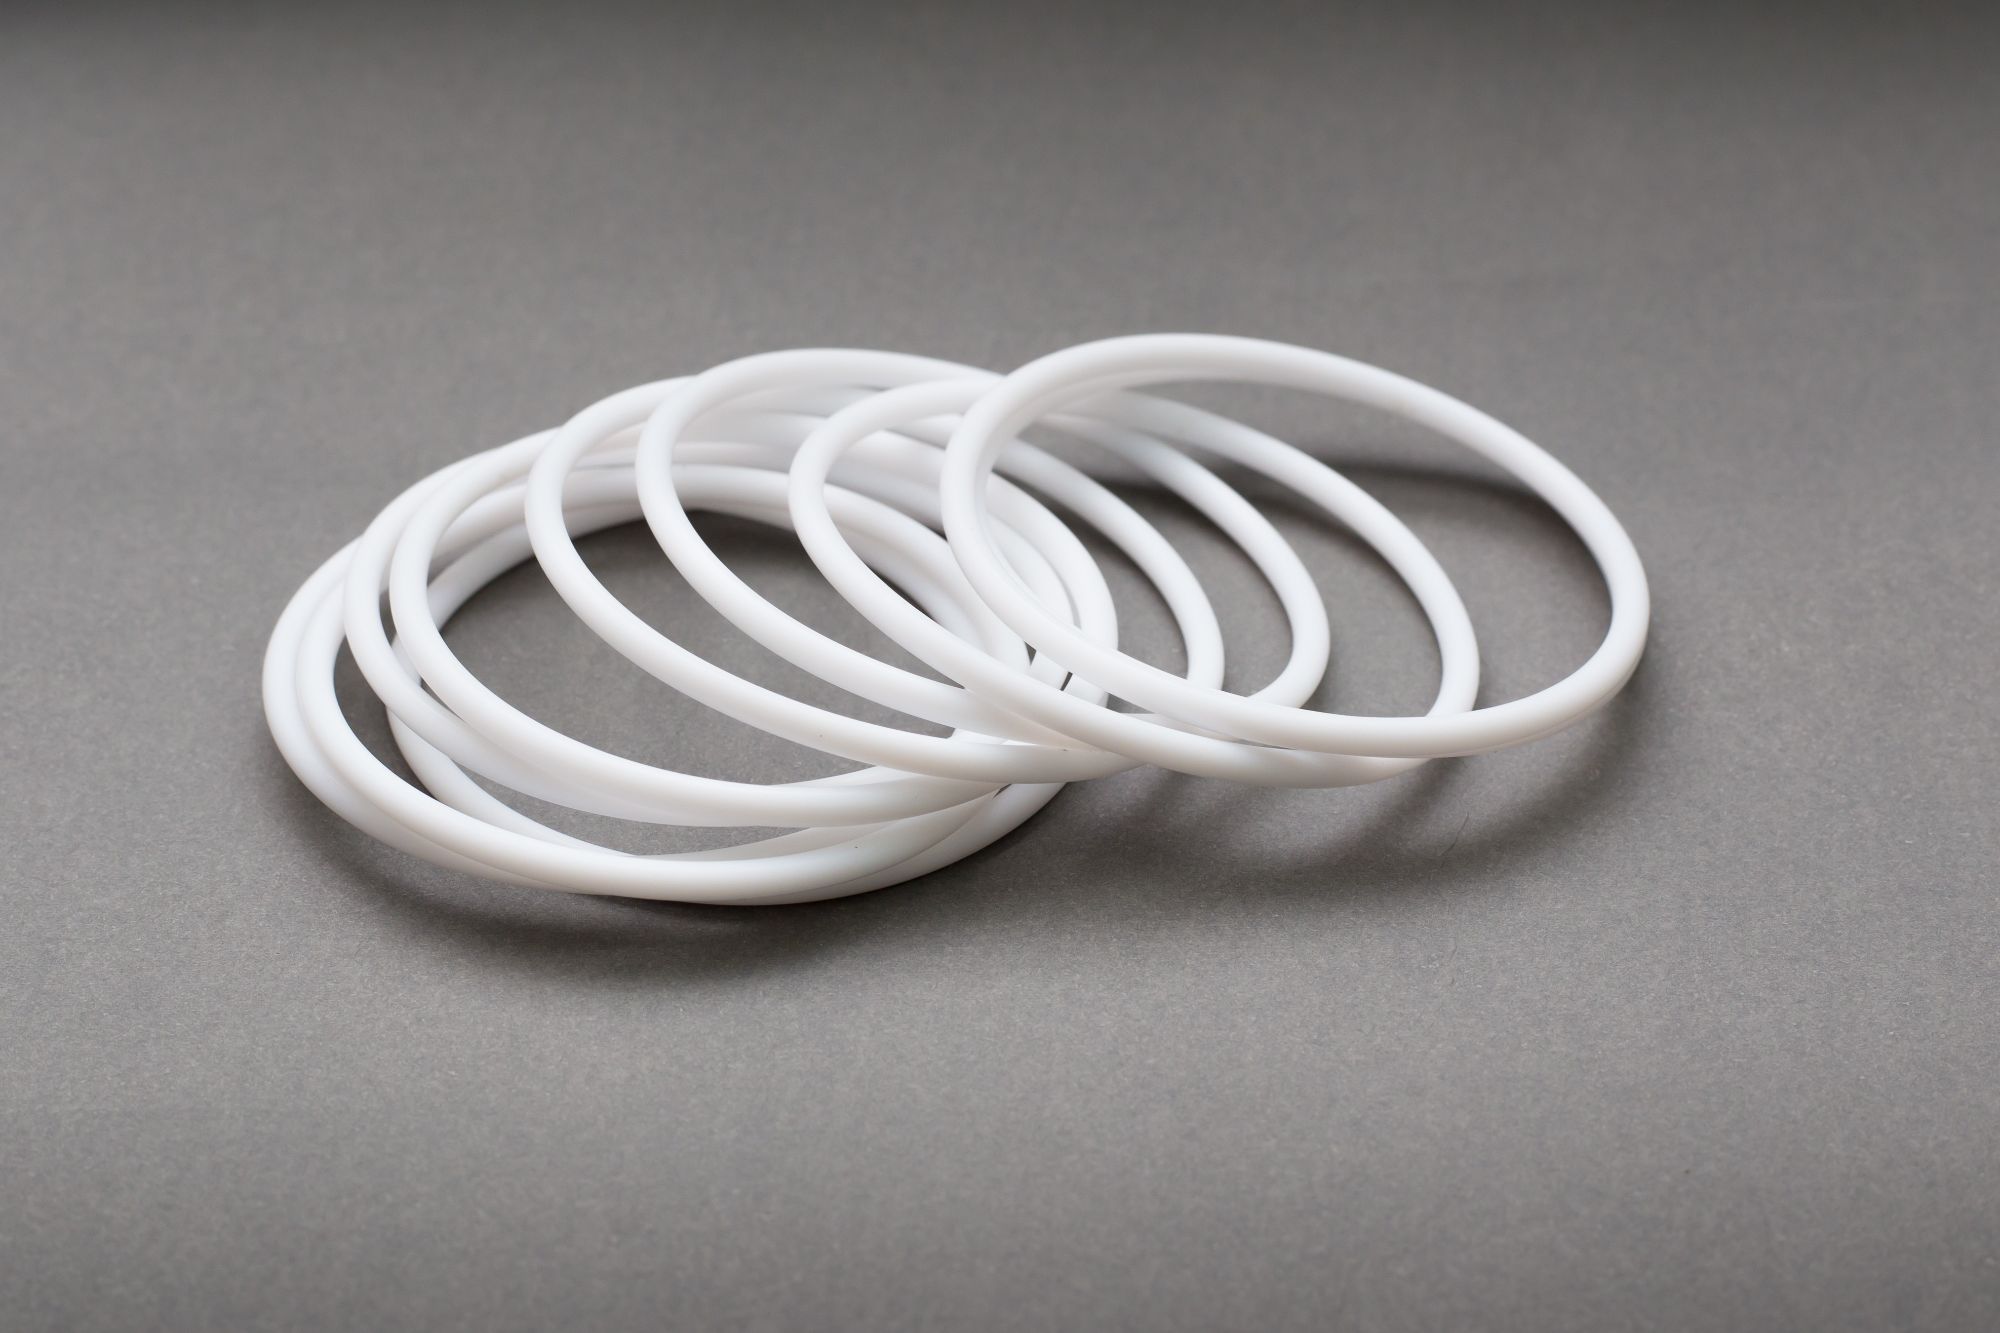 Sell ptfe rings, Good quality ptfe rings manufacturers